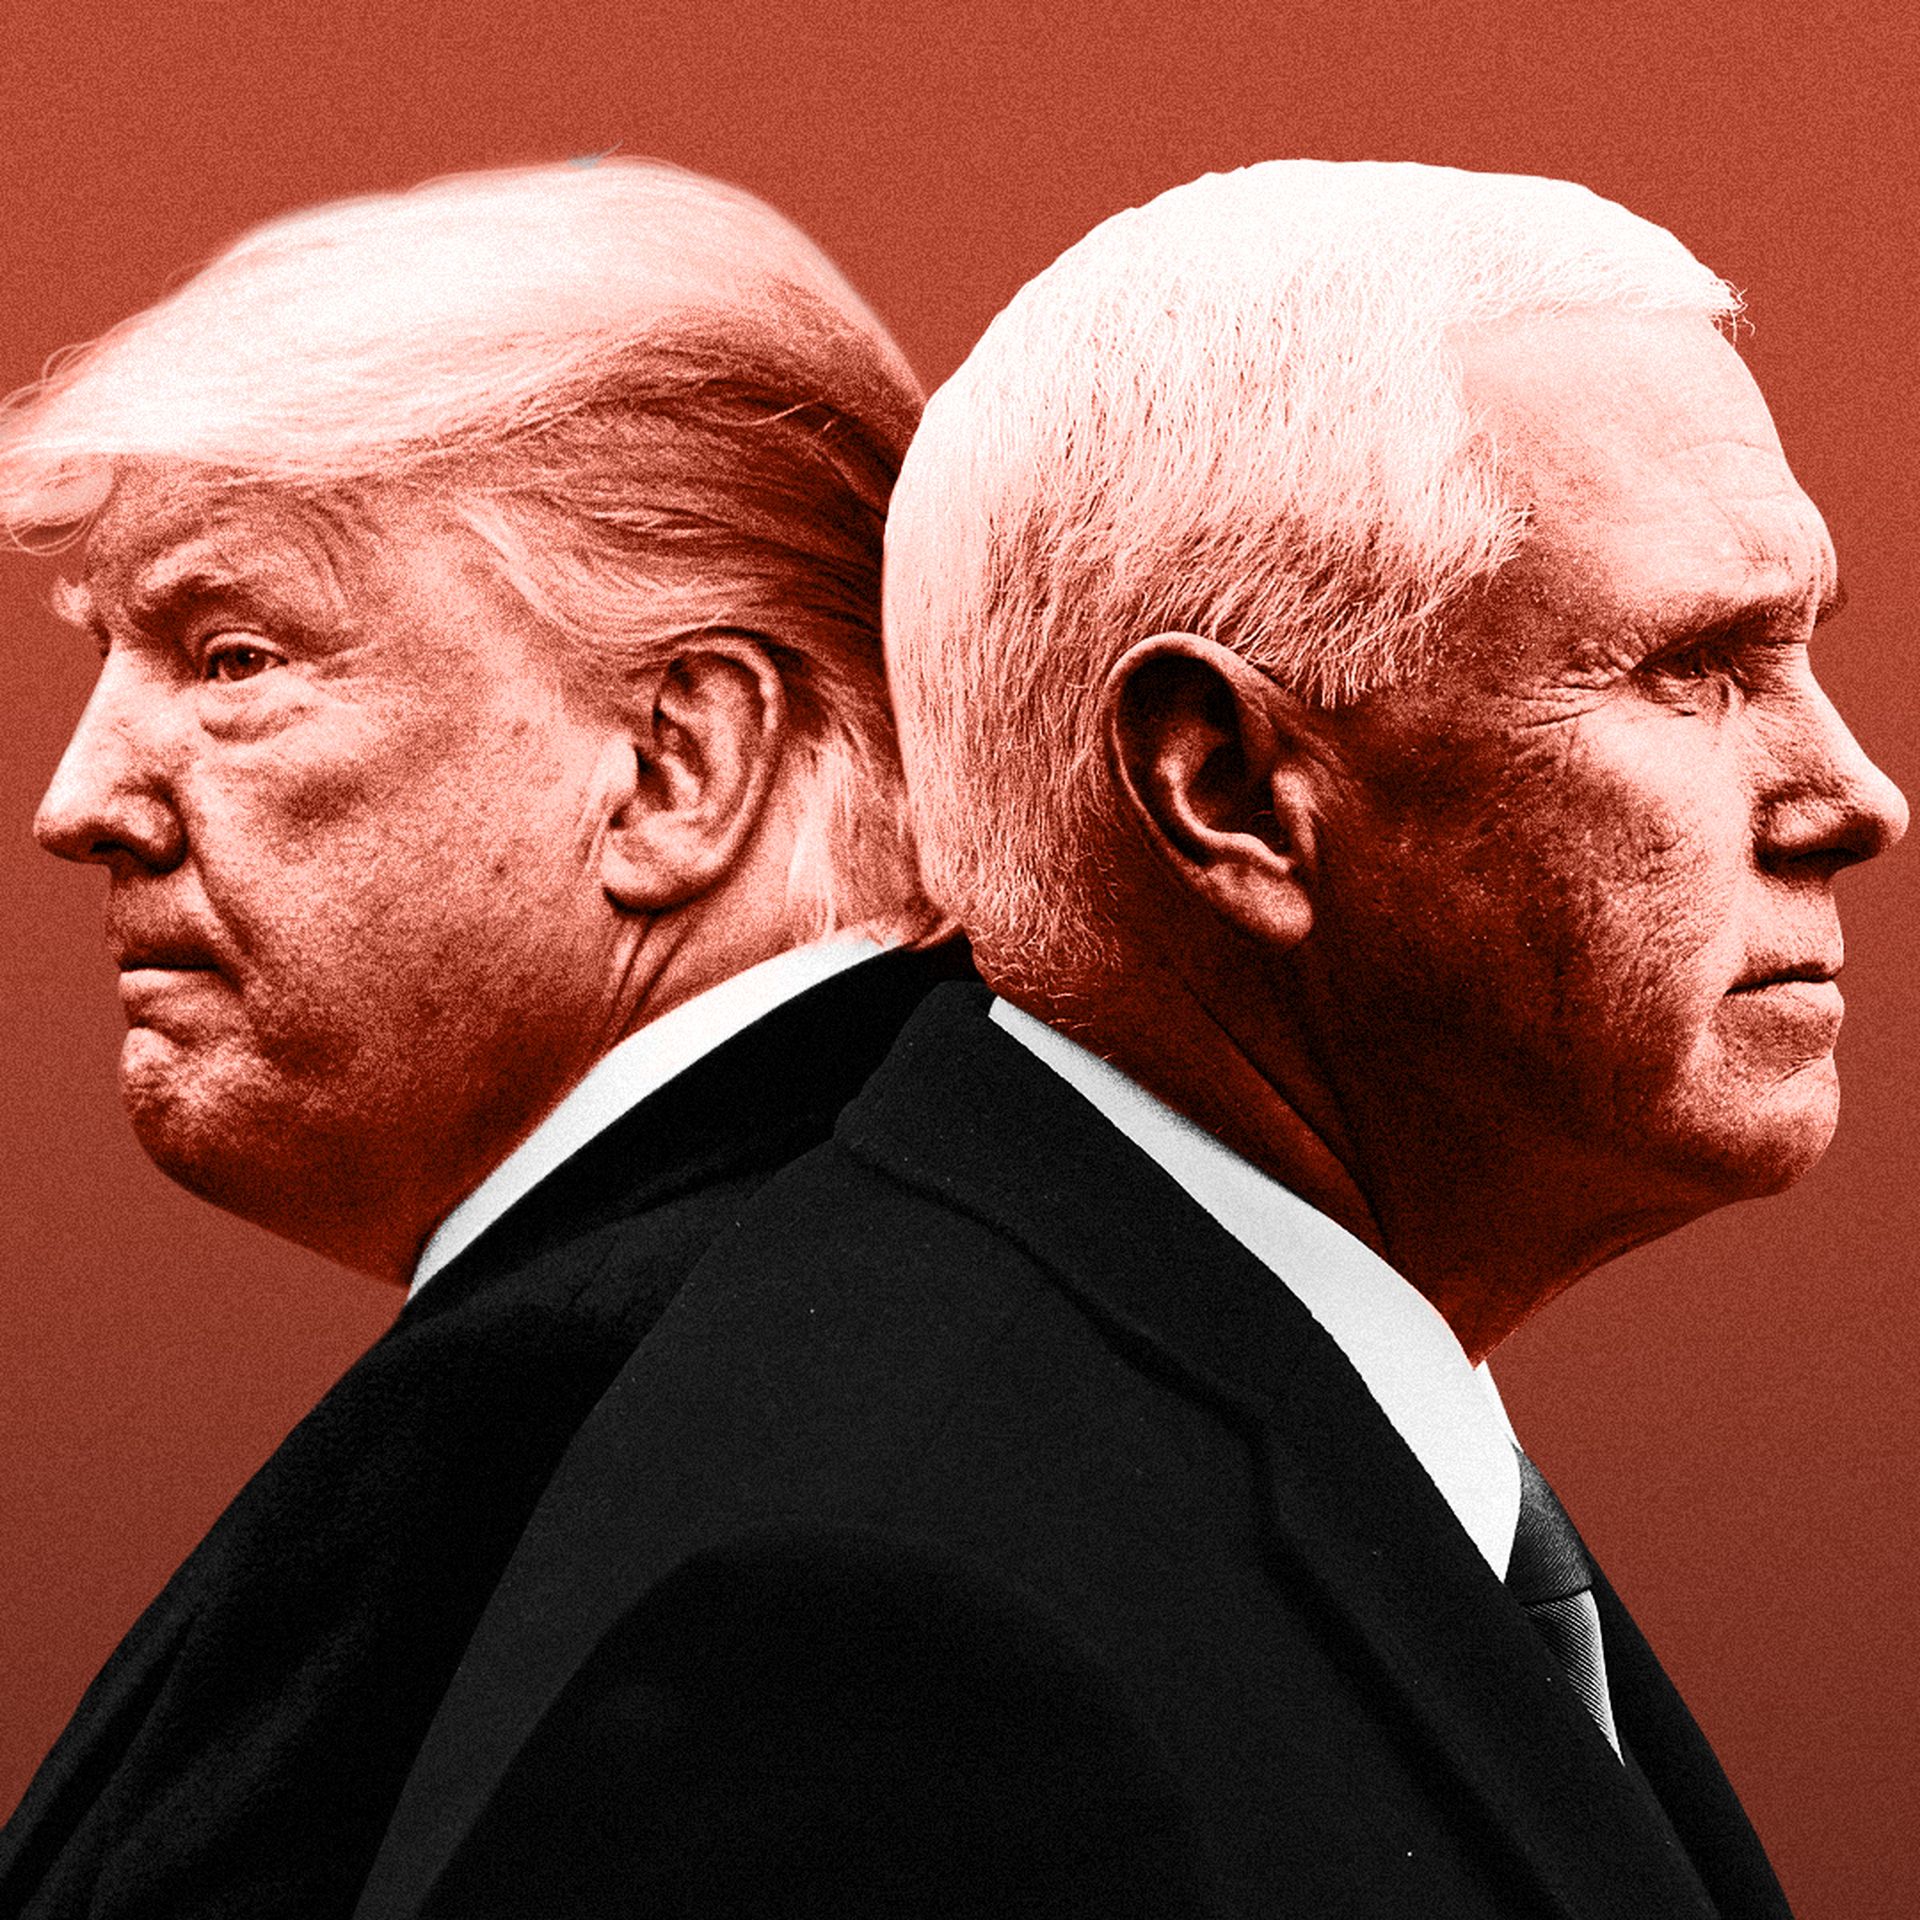 Illustration of Mike Pence and Donald Trump in profile facing away from each other.